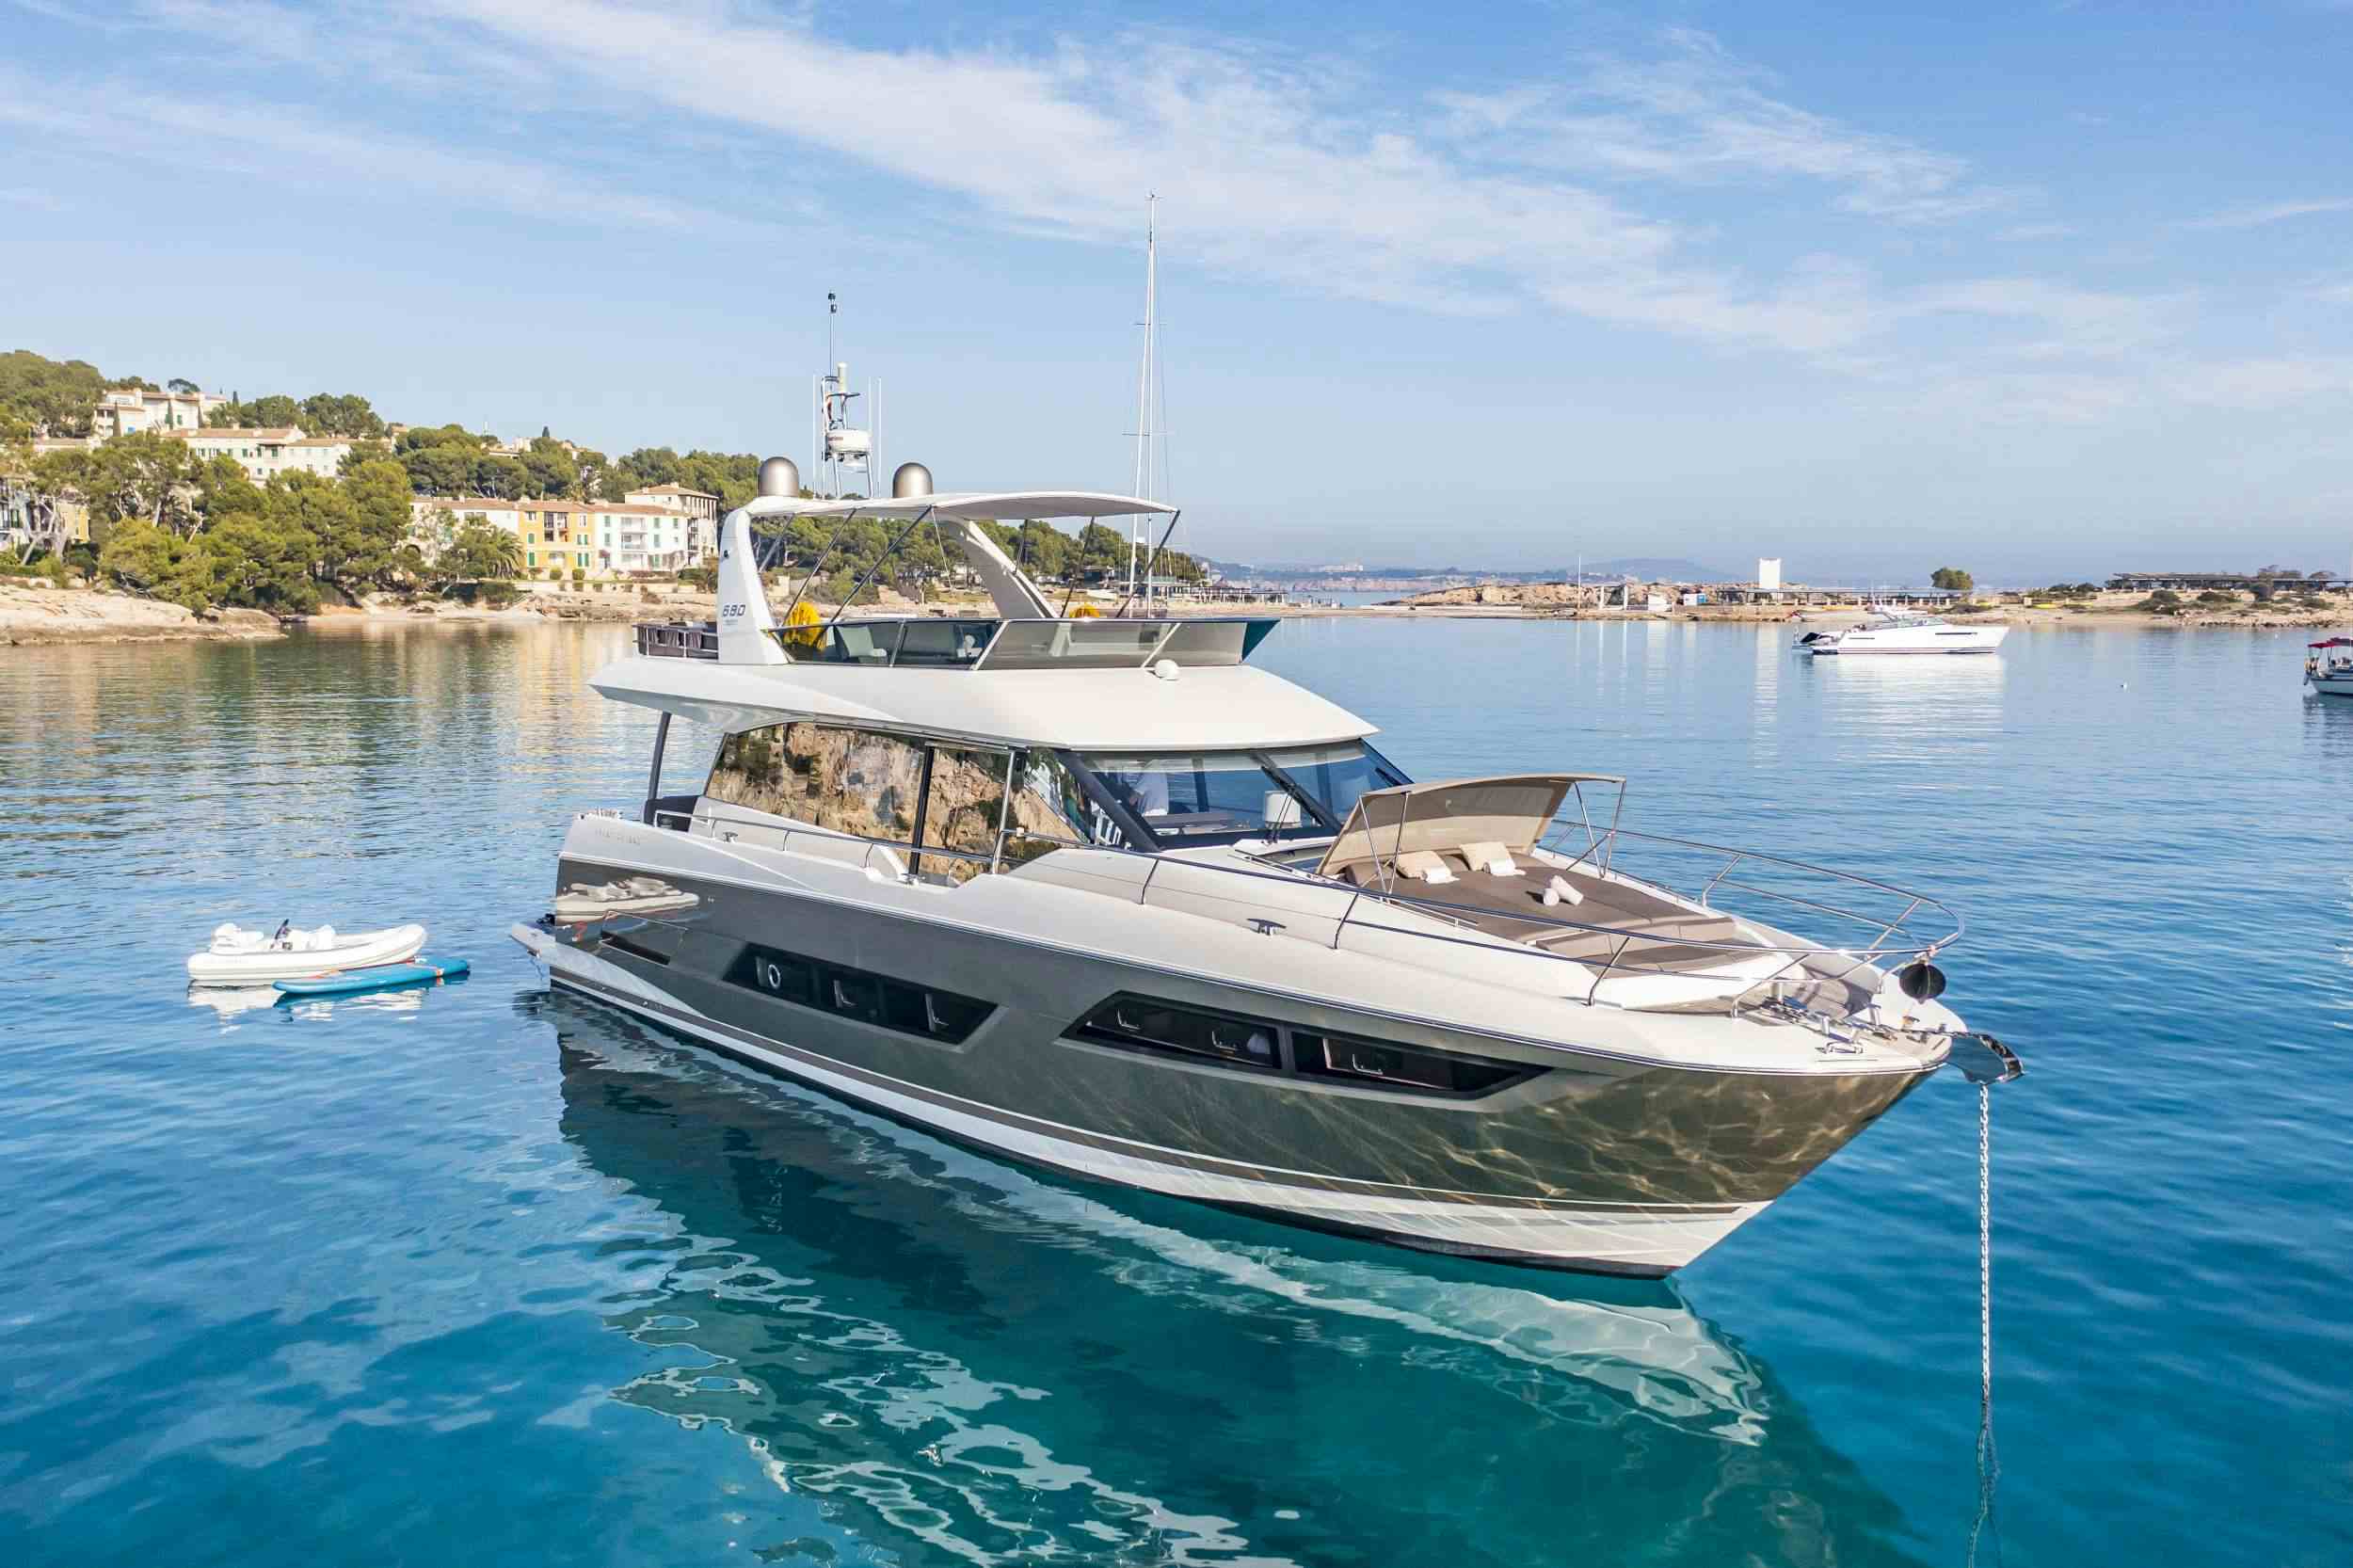 BLUE M - Yacht Charter Cala D`Or & Boat hire in W. Med -Naples/Sicily, W. Med -Riviera/Cors/Sard., W. Med - Spain/Balearics | Winter: Caribbean Virgin Islands (US/BVI), Caribbean Leewards, Caribbean Windwards 1